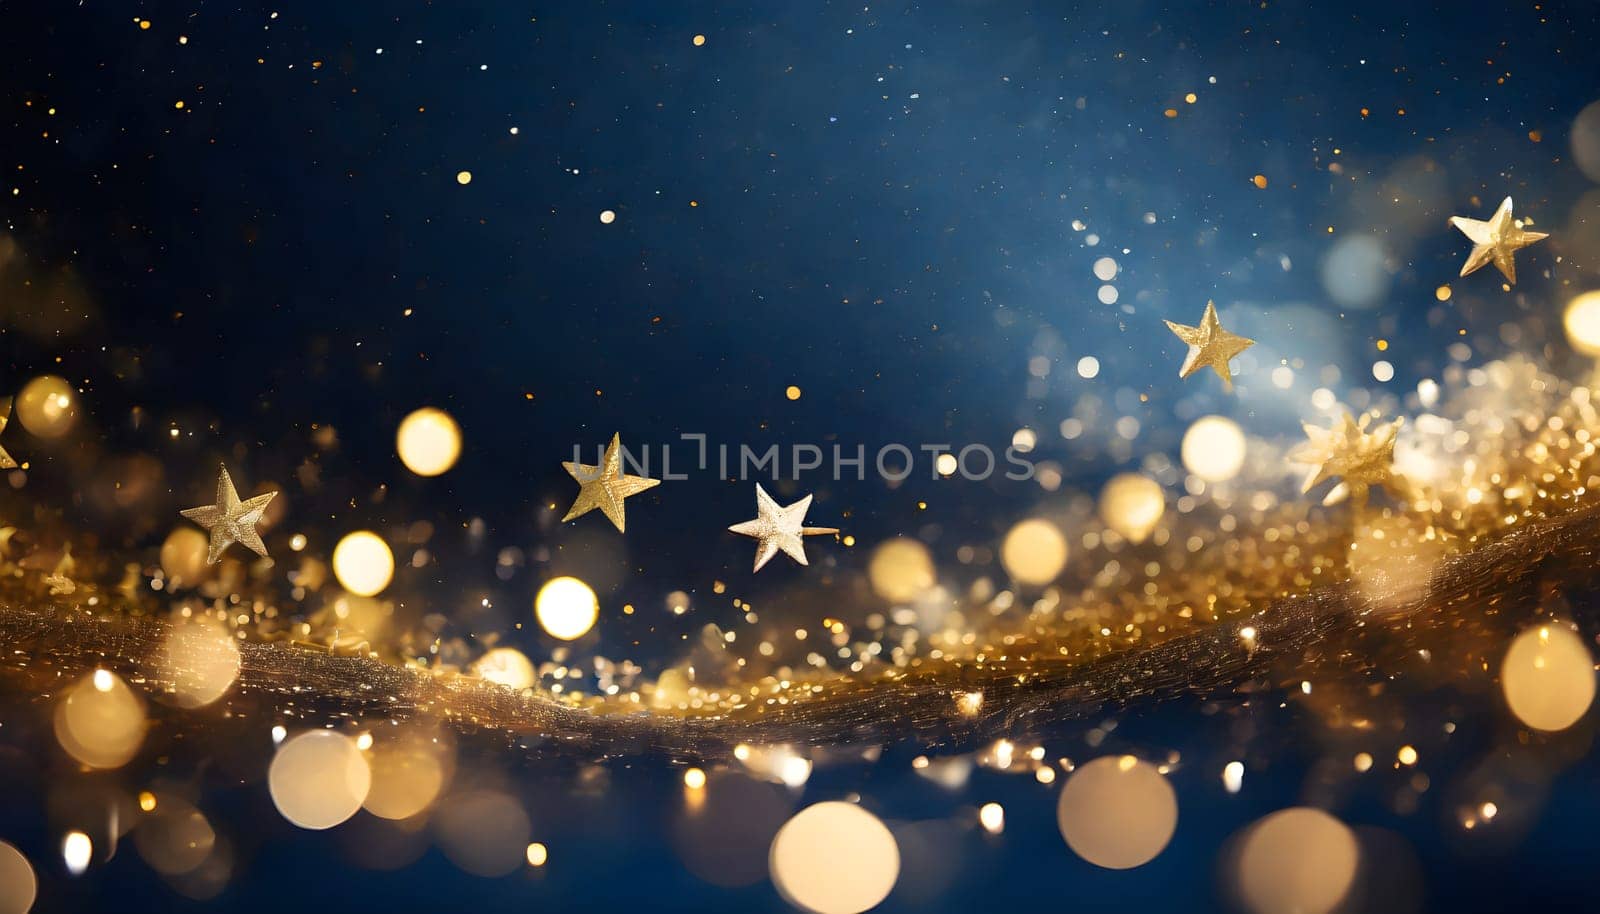 A stunning winter wonderland with golden particles dancing in the air, creating a mesmerizing bokeh effect against a deep navy background by Designlab